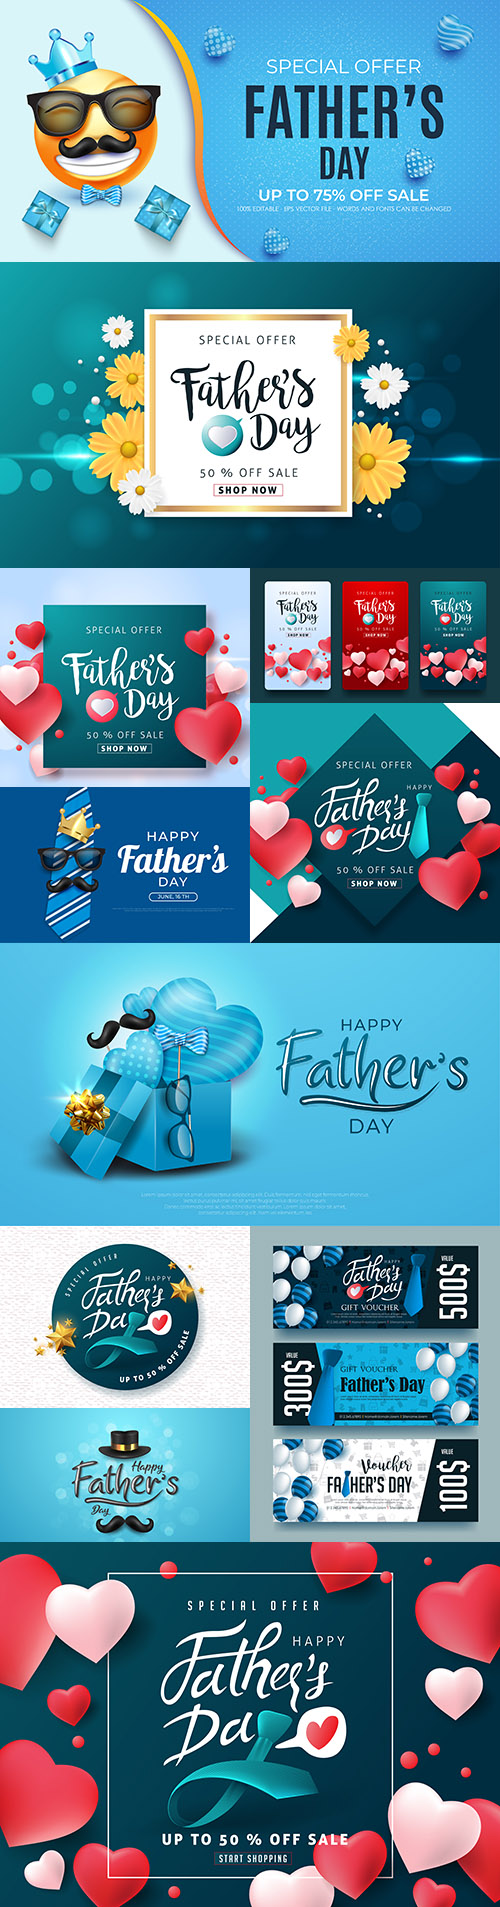 Happy Father 's Day design greeting card and banner 7